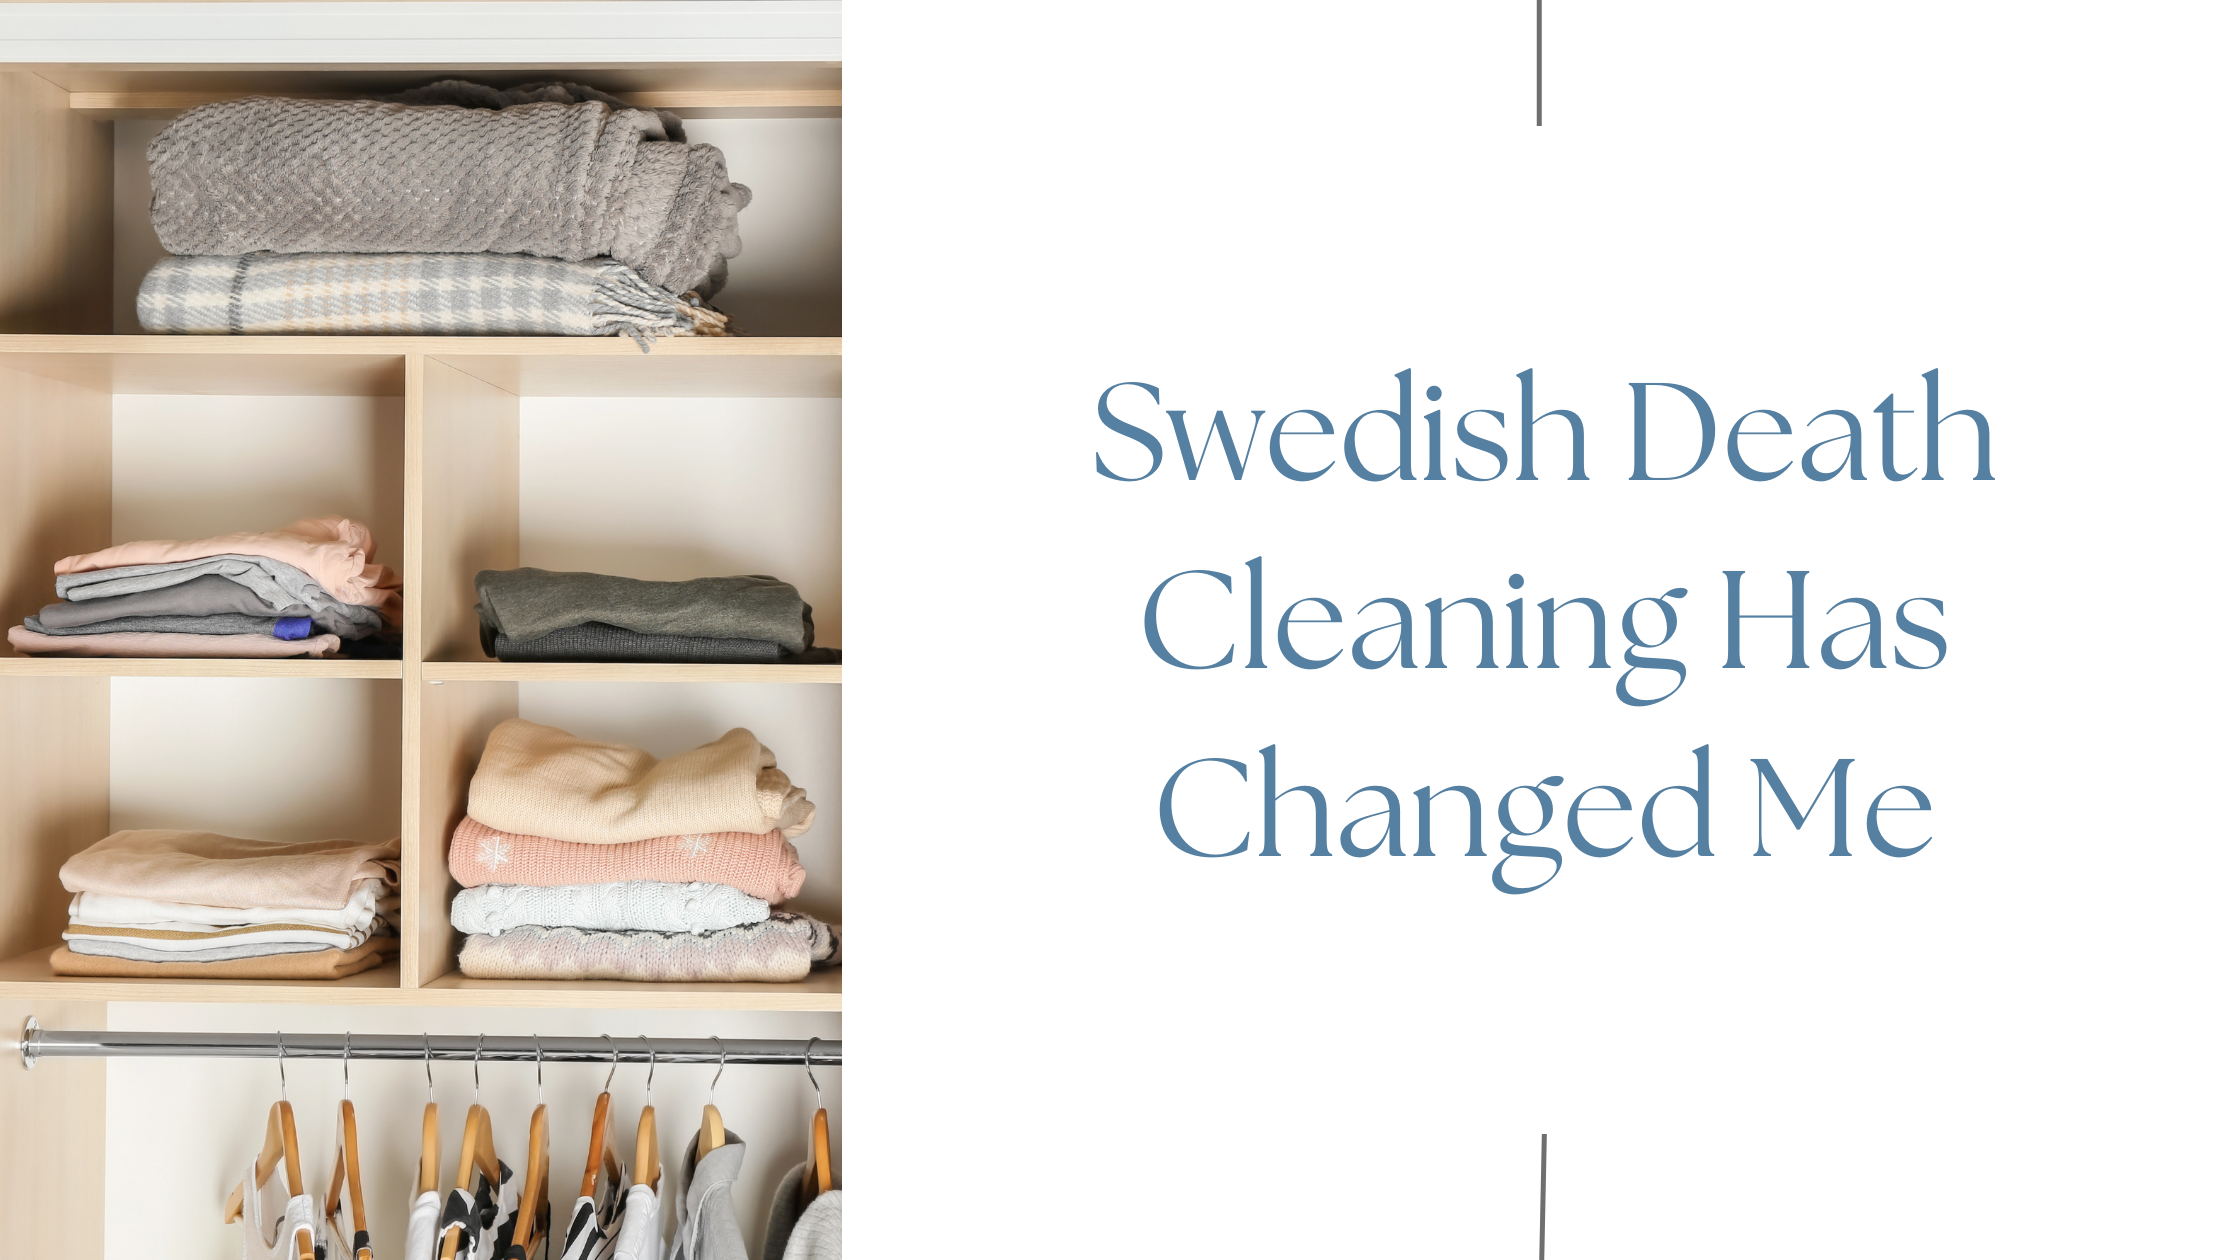 Swedish Death Cleaning Has Changed Me